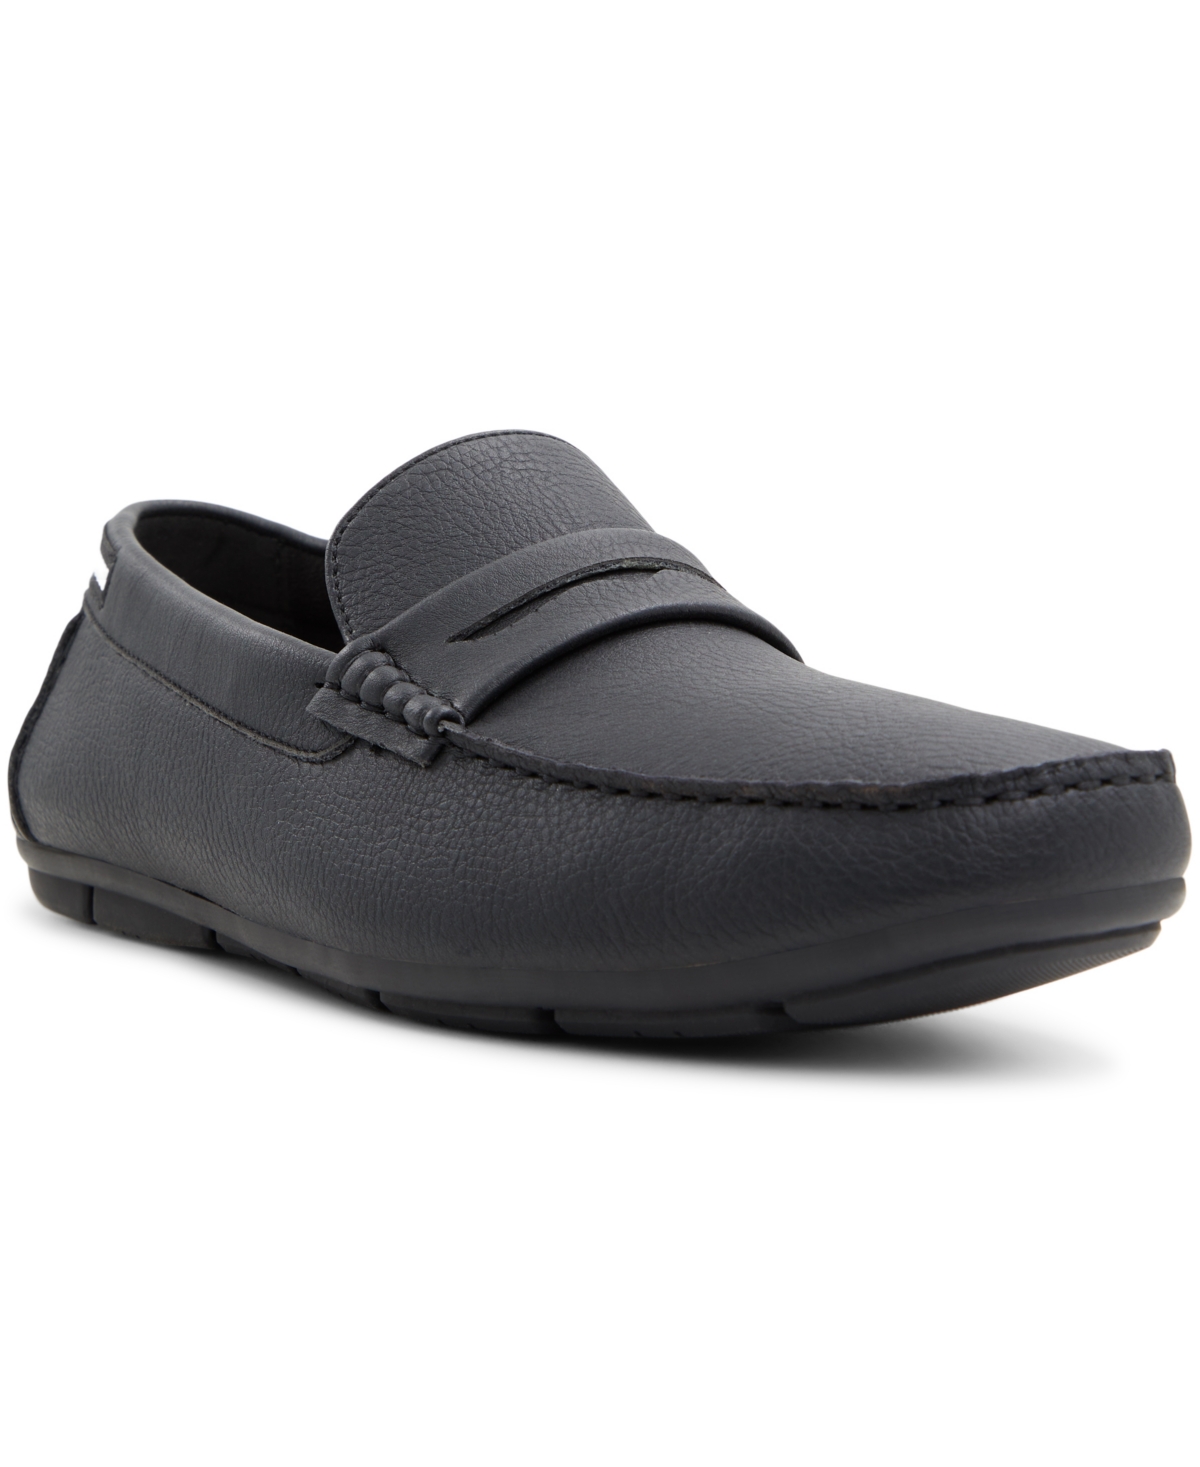 Men's Farina H Loafers - Other Black